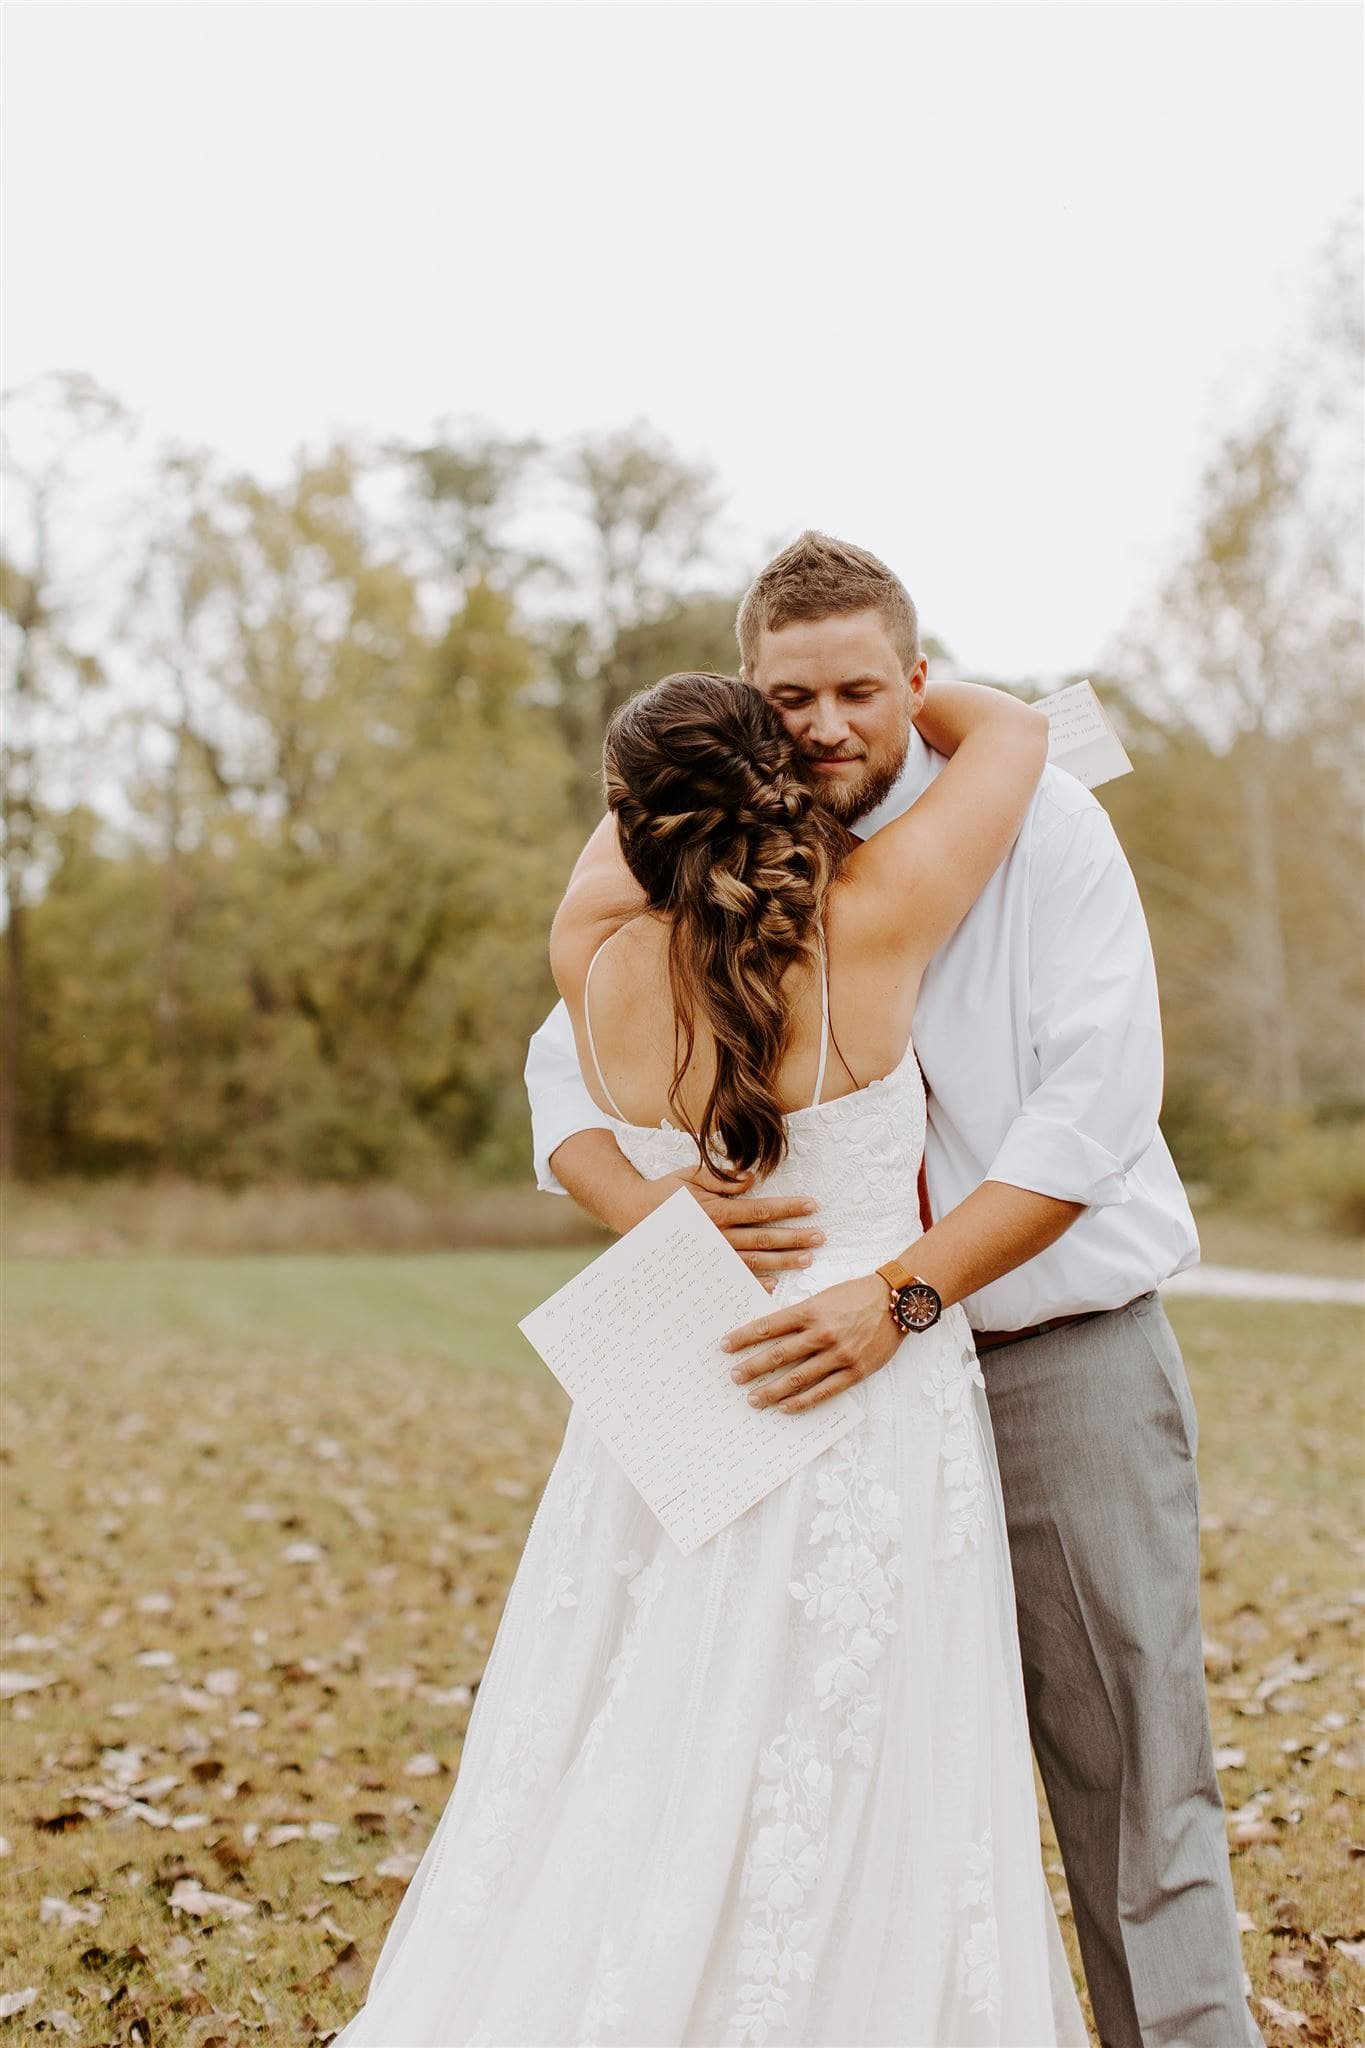  wedding recap, hannah and lance share a hug during their private vows 